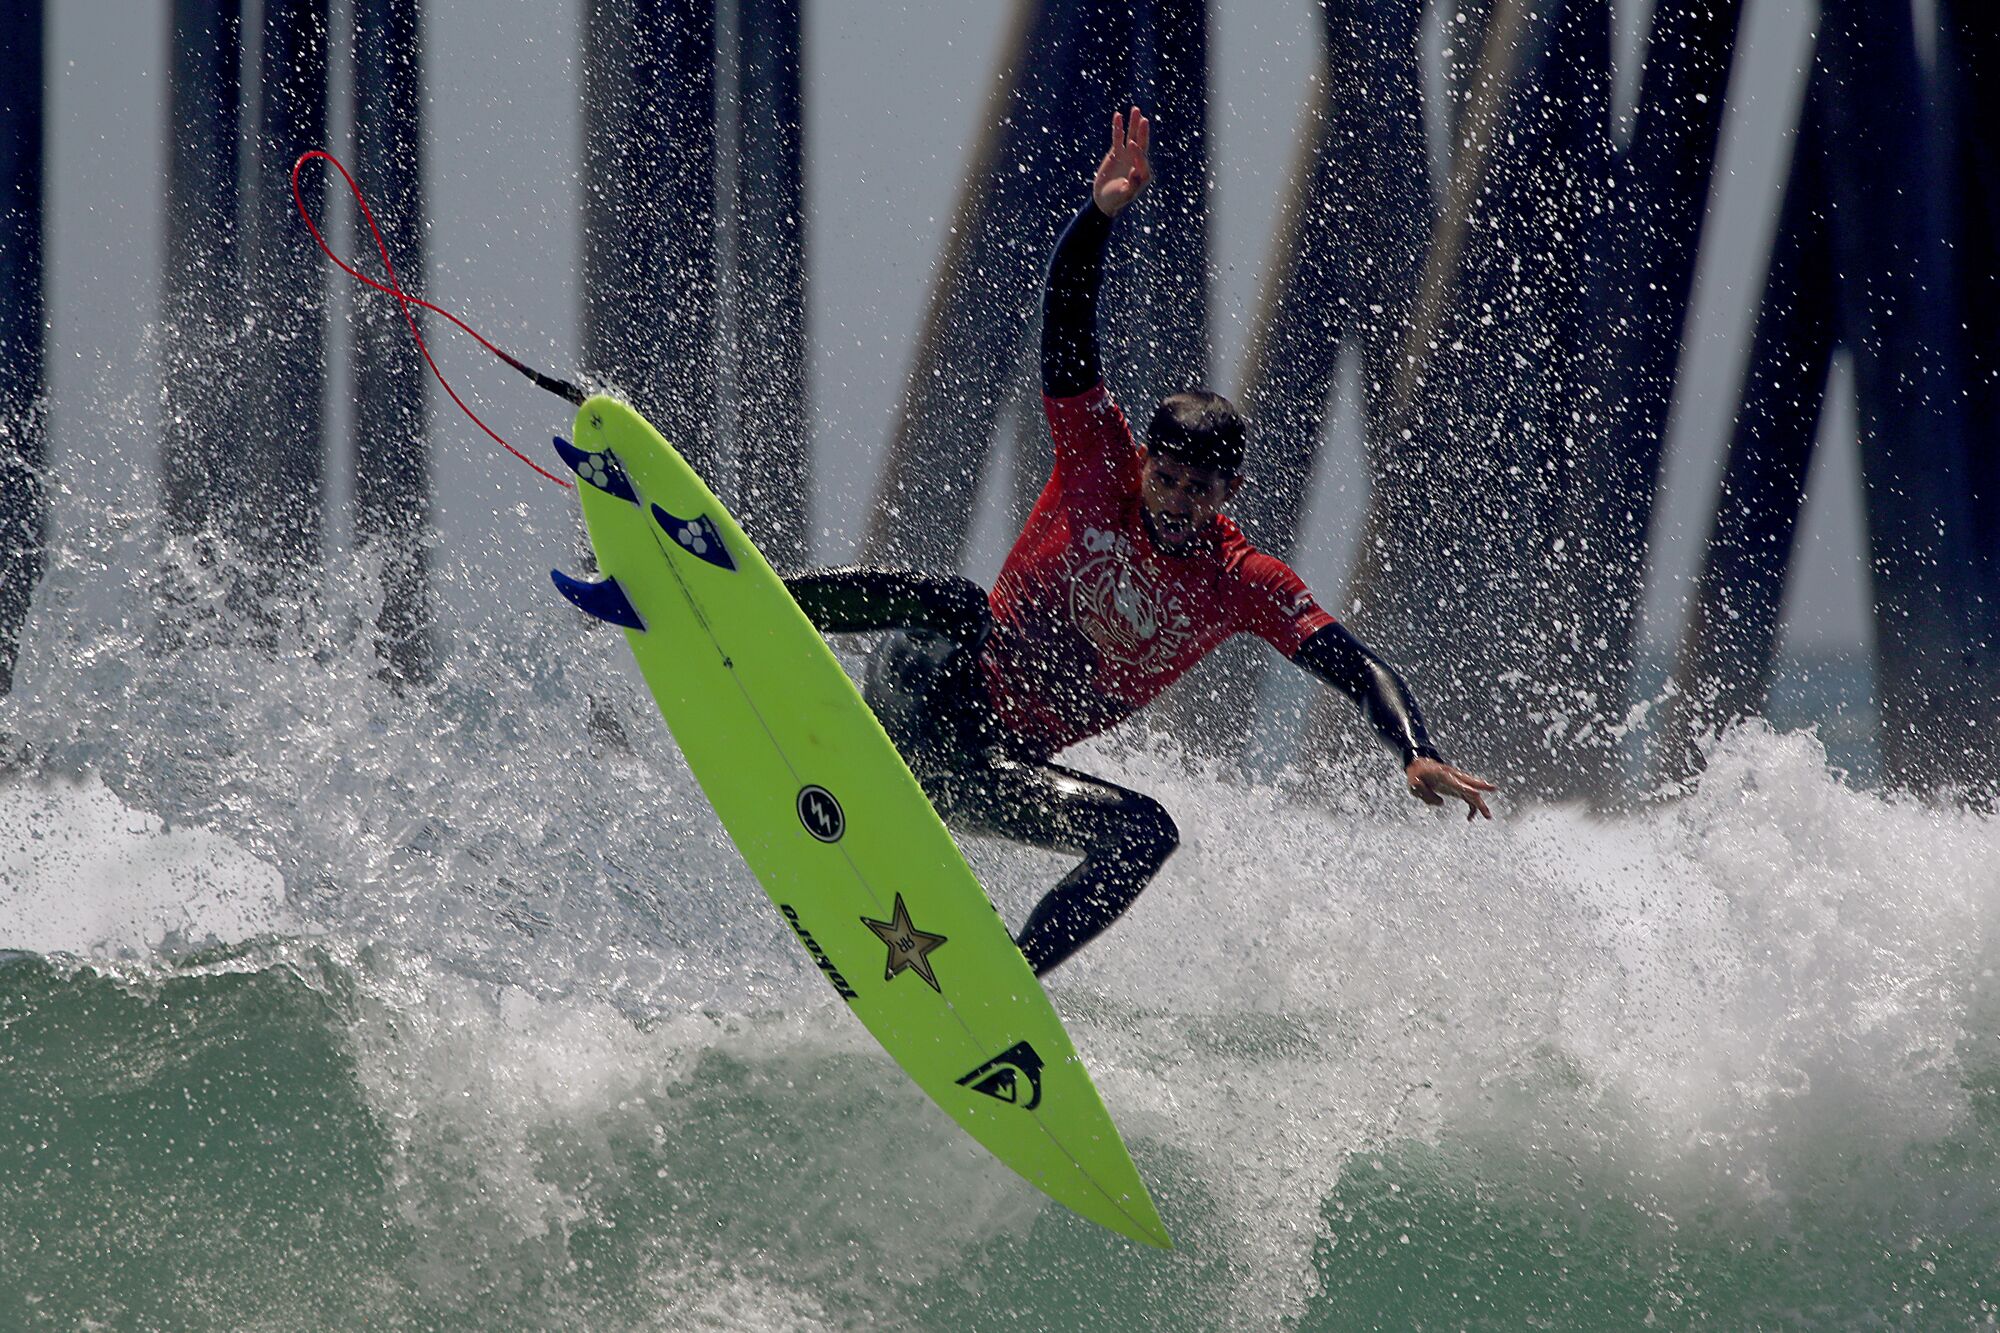 Ezekial Lau of Hawaii catches some air on his board on his way to winning the 2022 U.S. Open of Surfing.